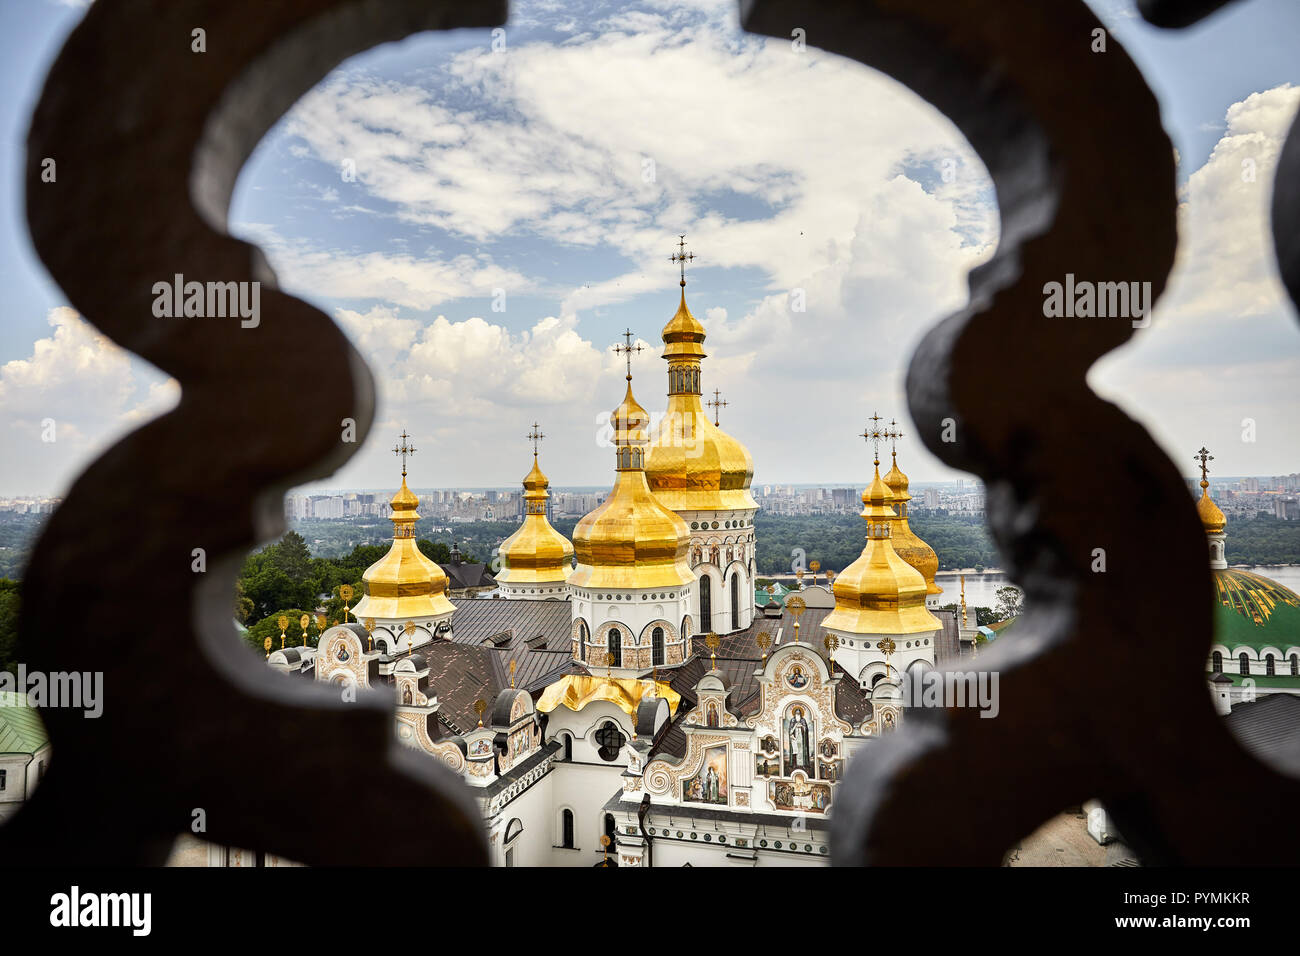 Church with golden domes at Kiev Pechersk Lavra Christian complex. Old historical architecture in Kiev, Ukraine Stock Photo